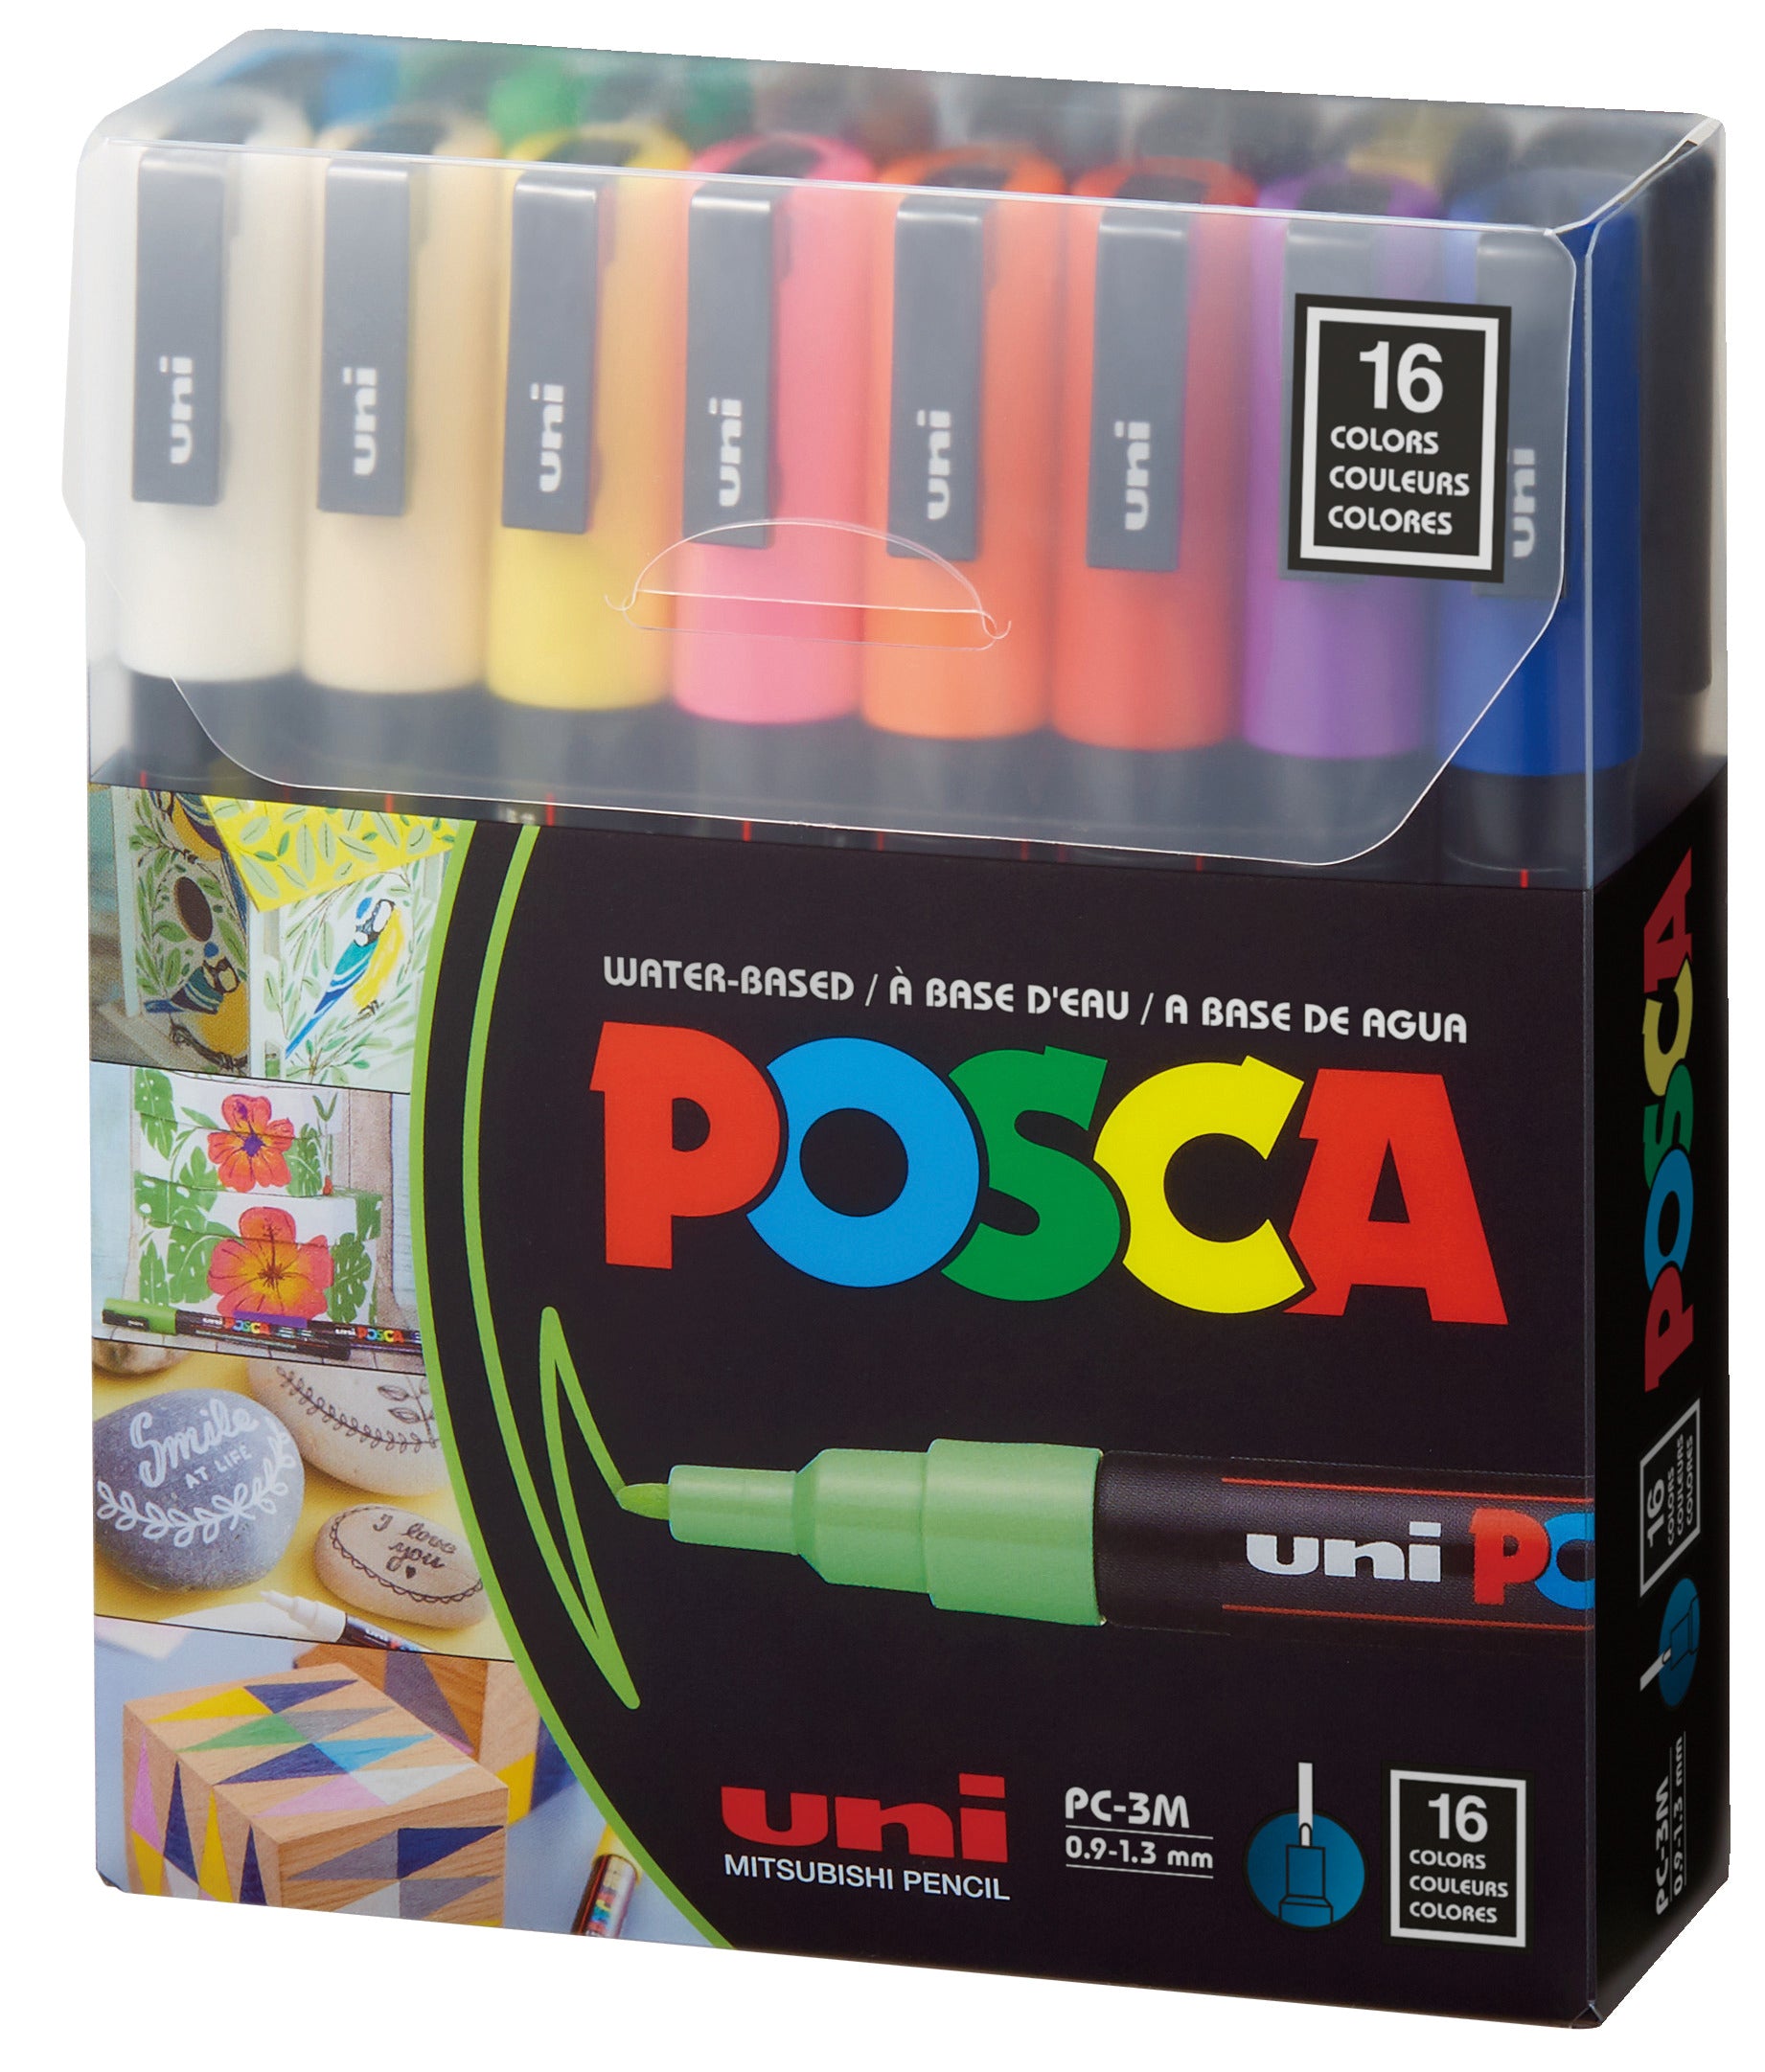 UV3 3-Pack Wood Touch-Up Markers